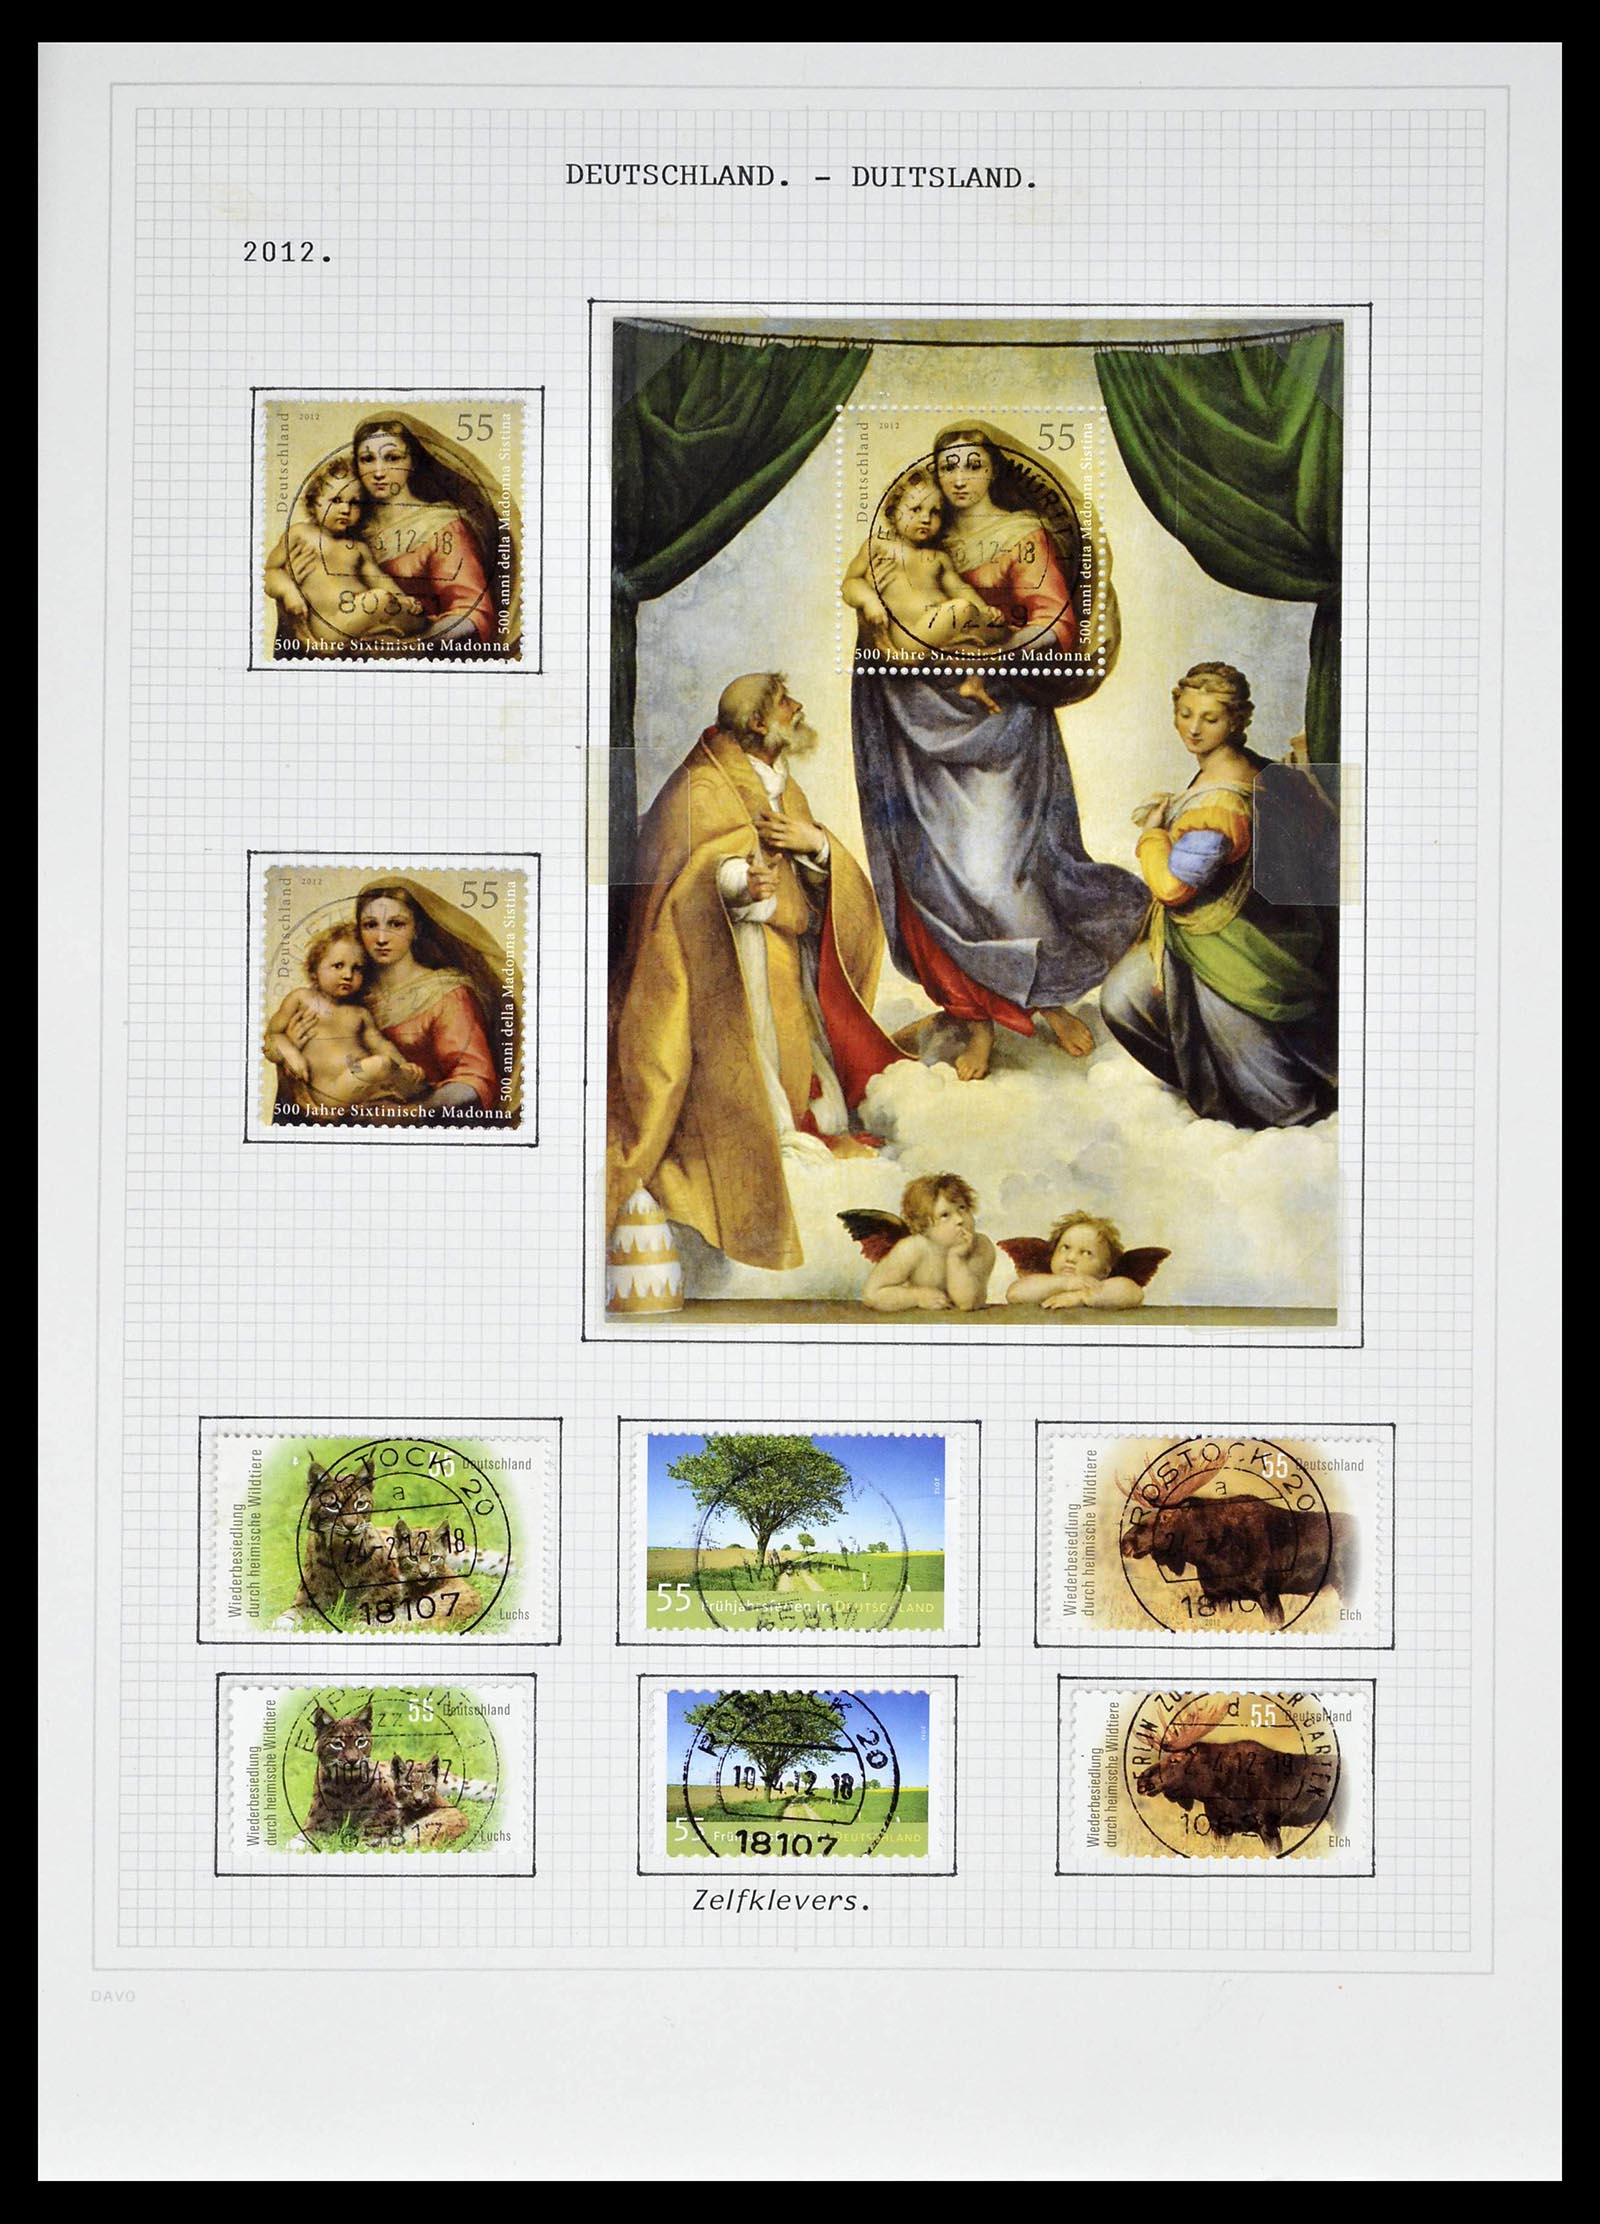 39324 0207 - Stamp collection 39324 Bundespost 1986-2012.